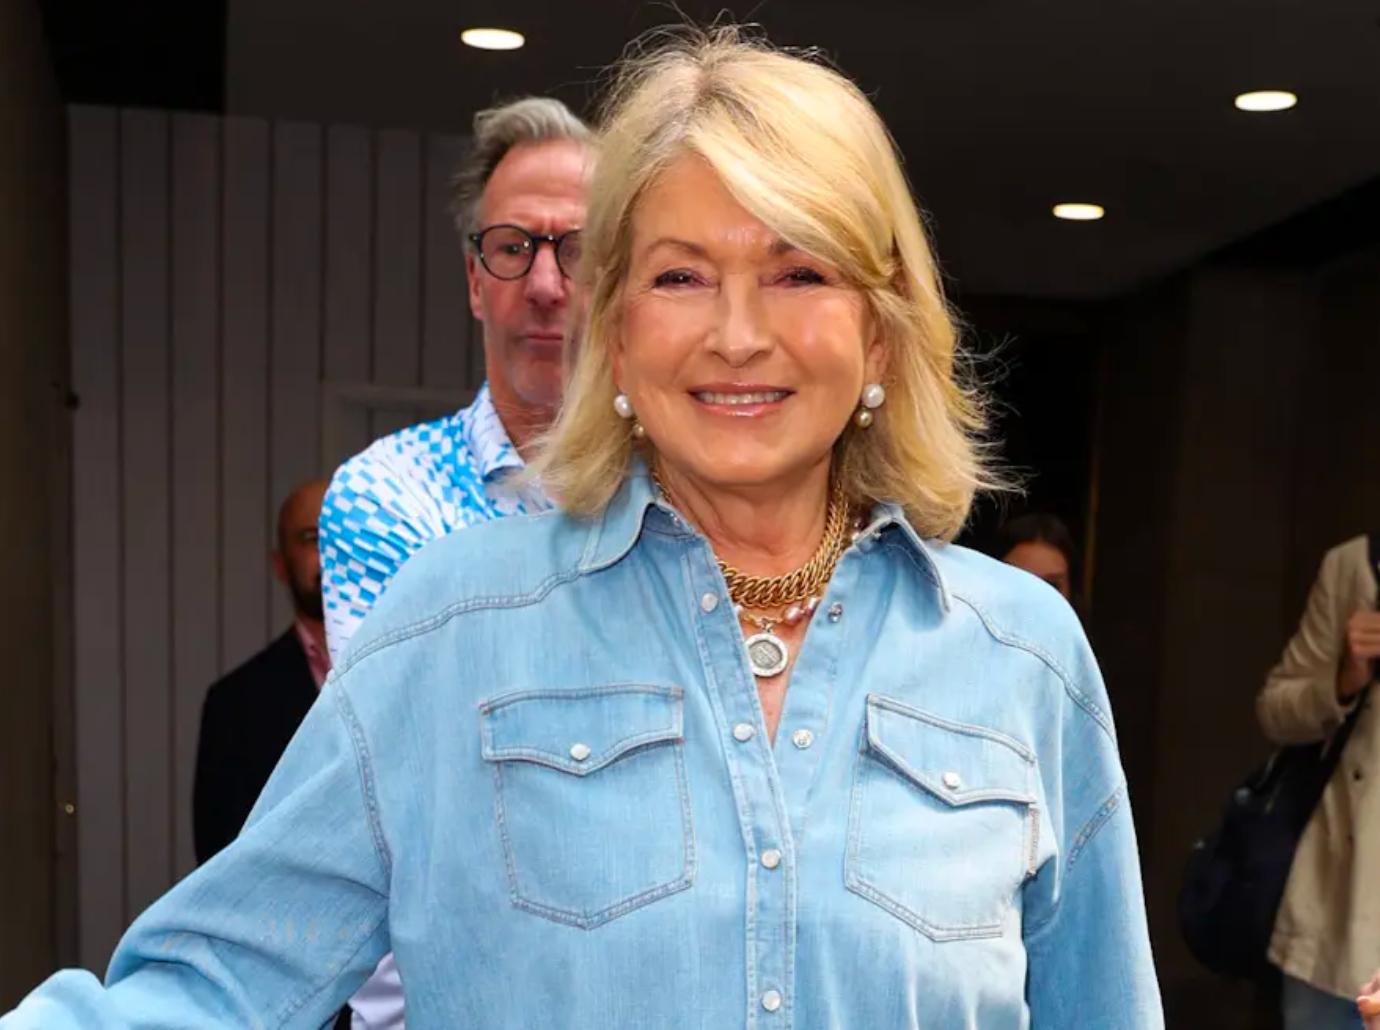 Martha Stewart Makes Inappropriate Confession On 'Drew Barrymore Show